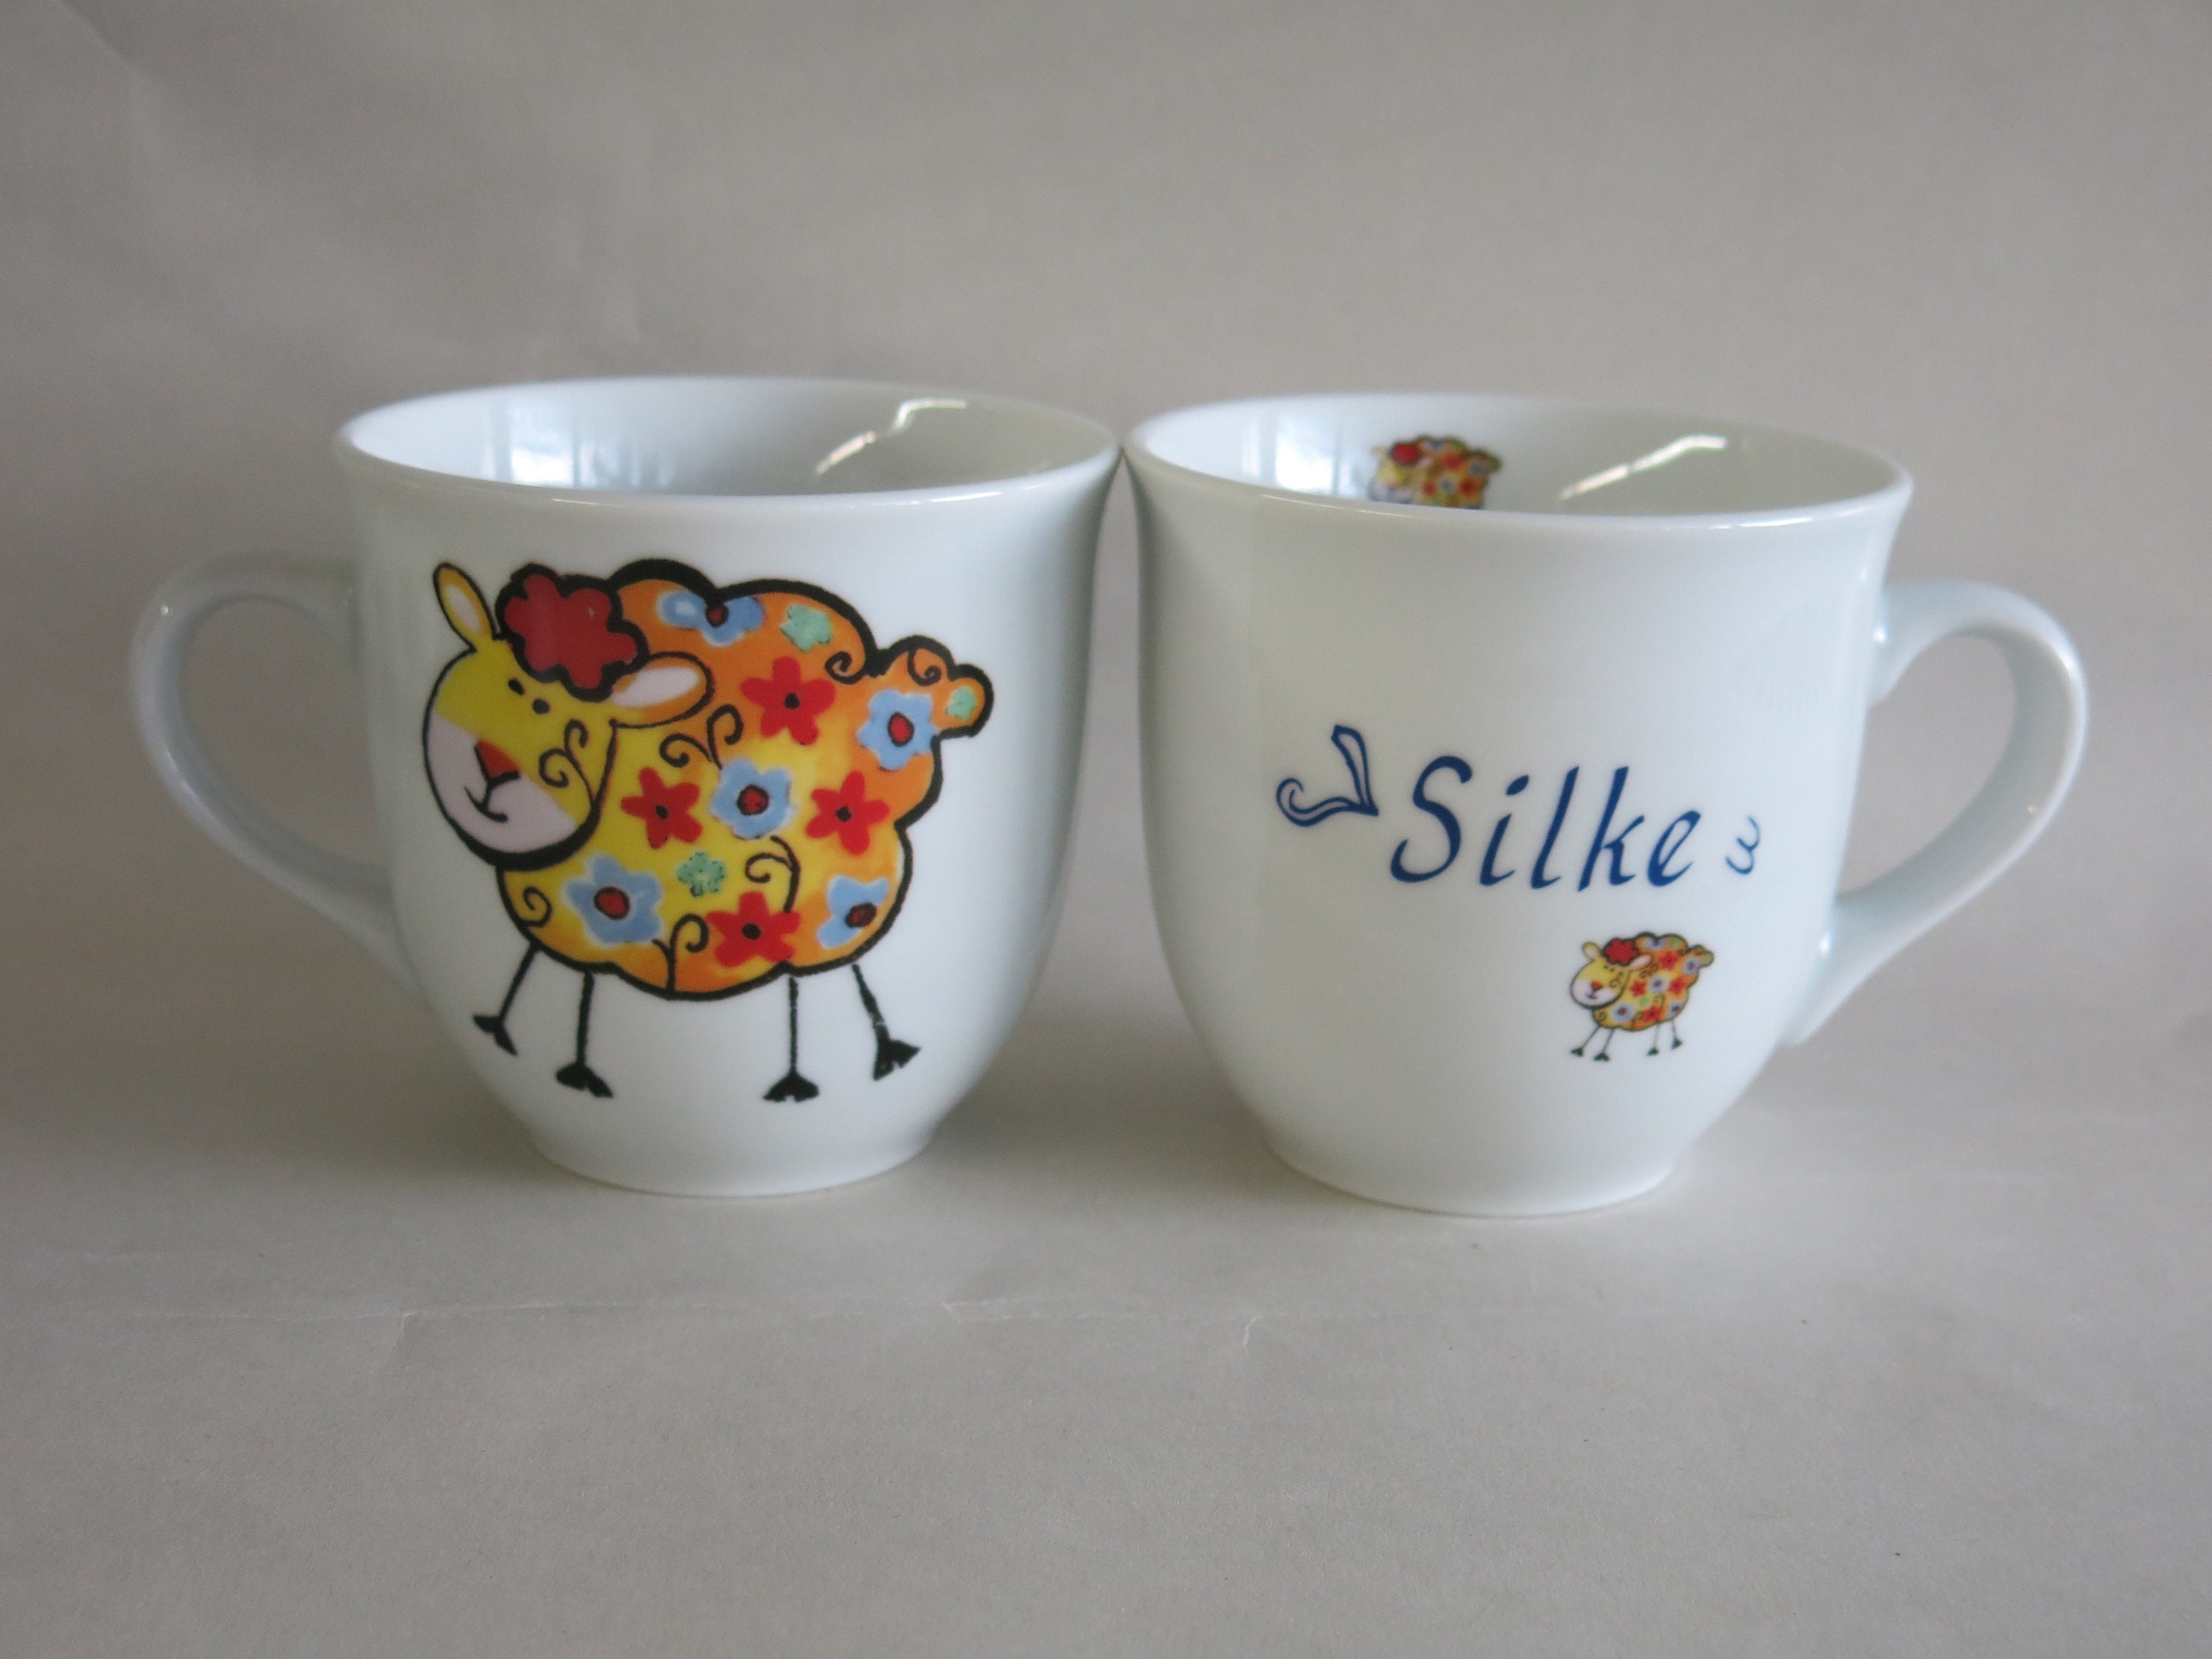 Fur, Colors Power Sheep. in 3 Large Colorful Sheep Sweden Their in With Personalized Flower Etsy Cups. With Flowers - on Names With Name Cups